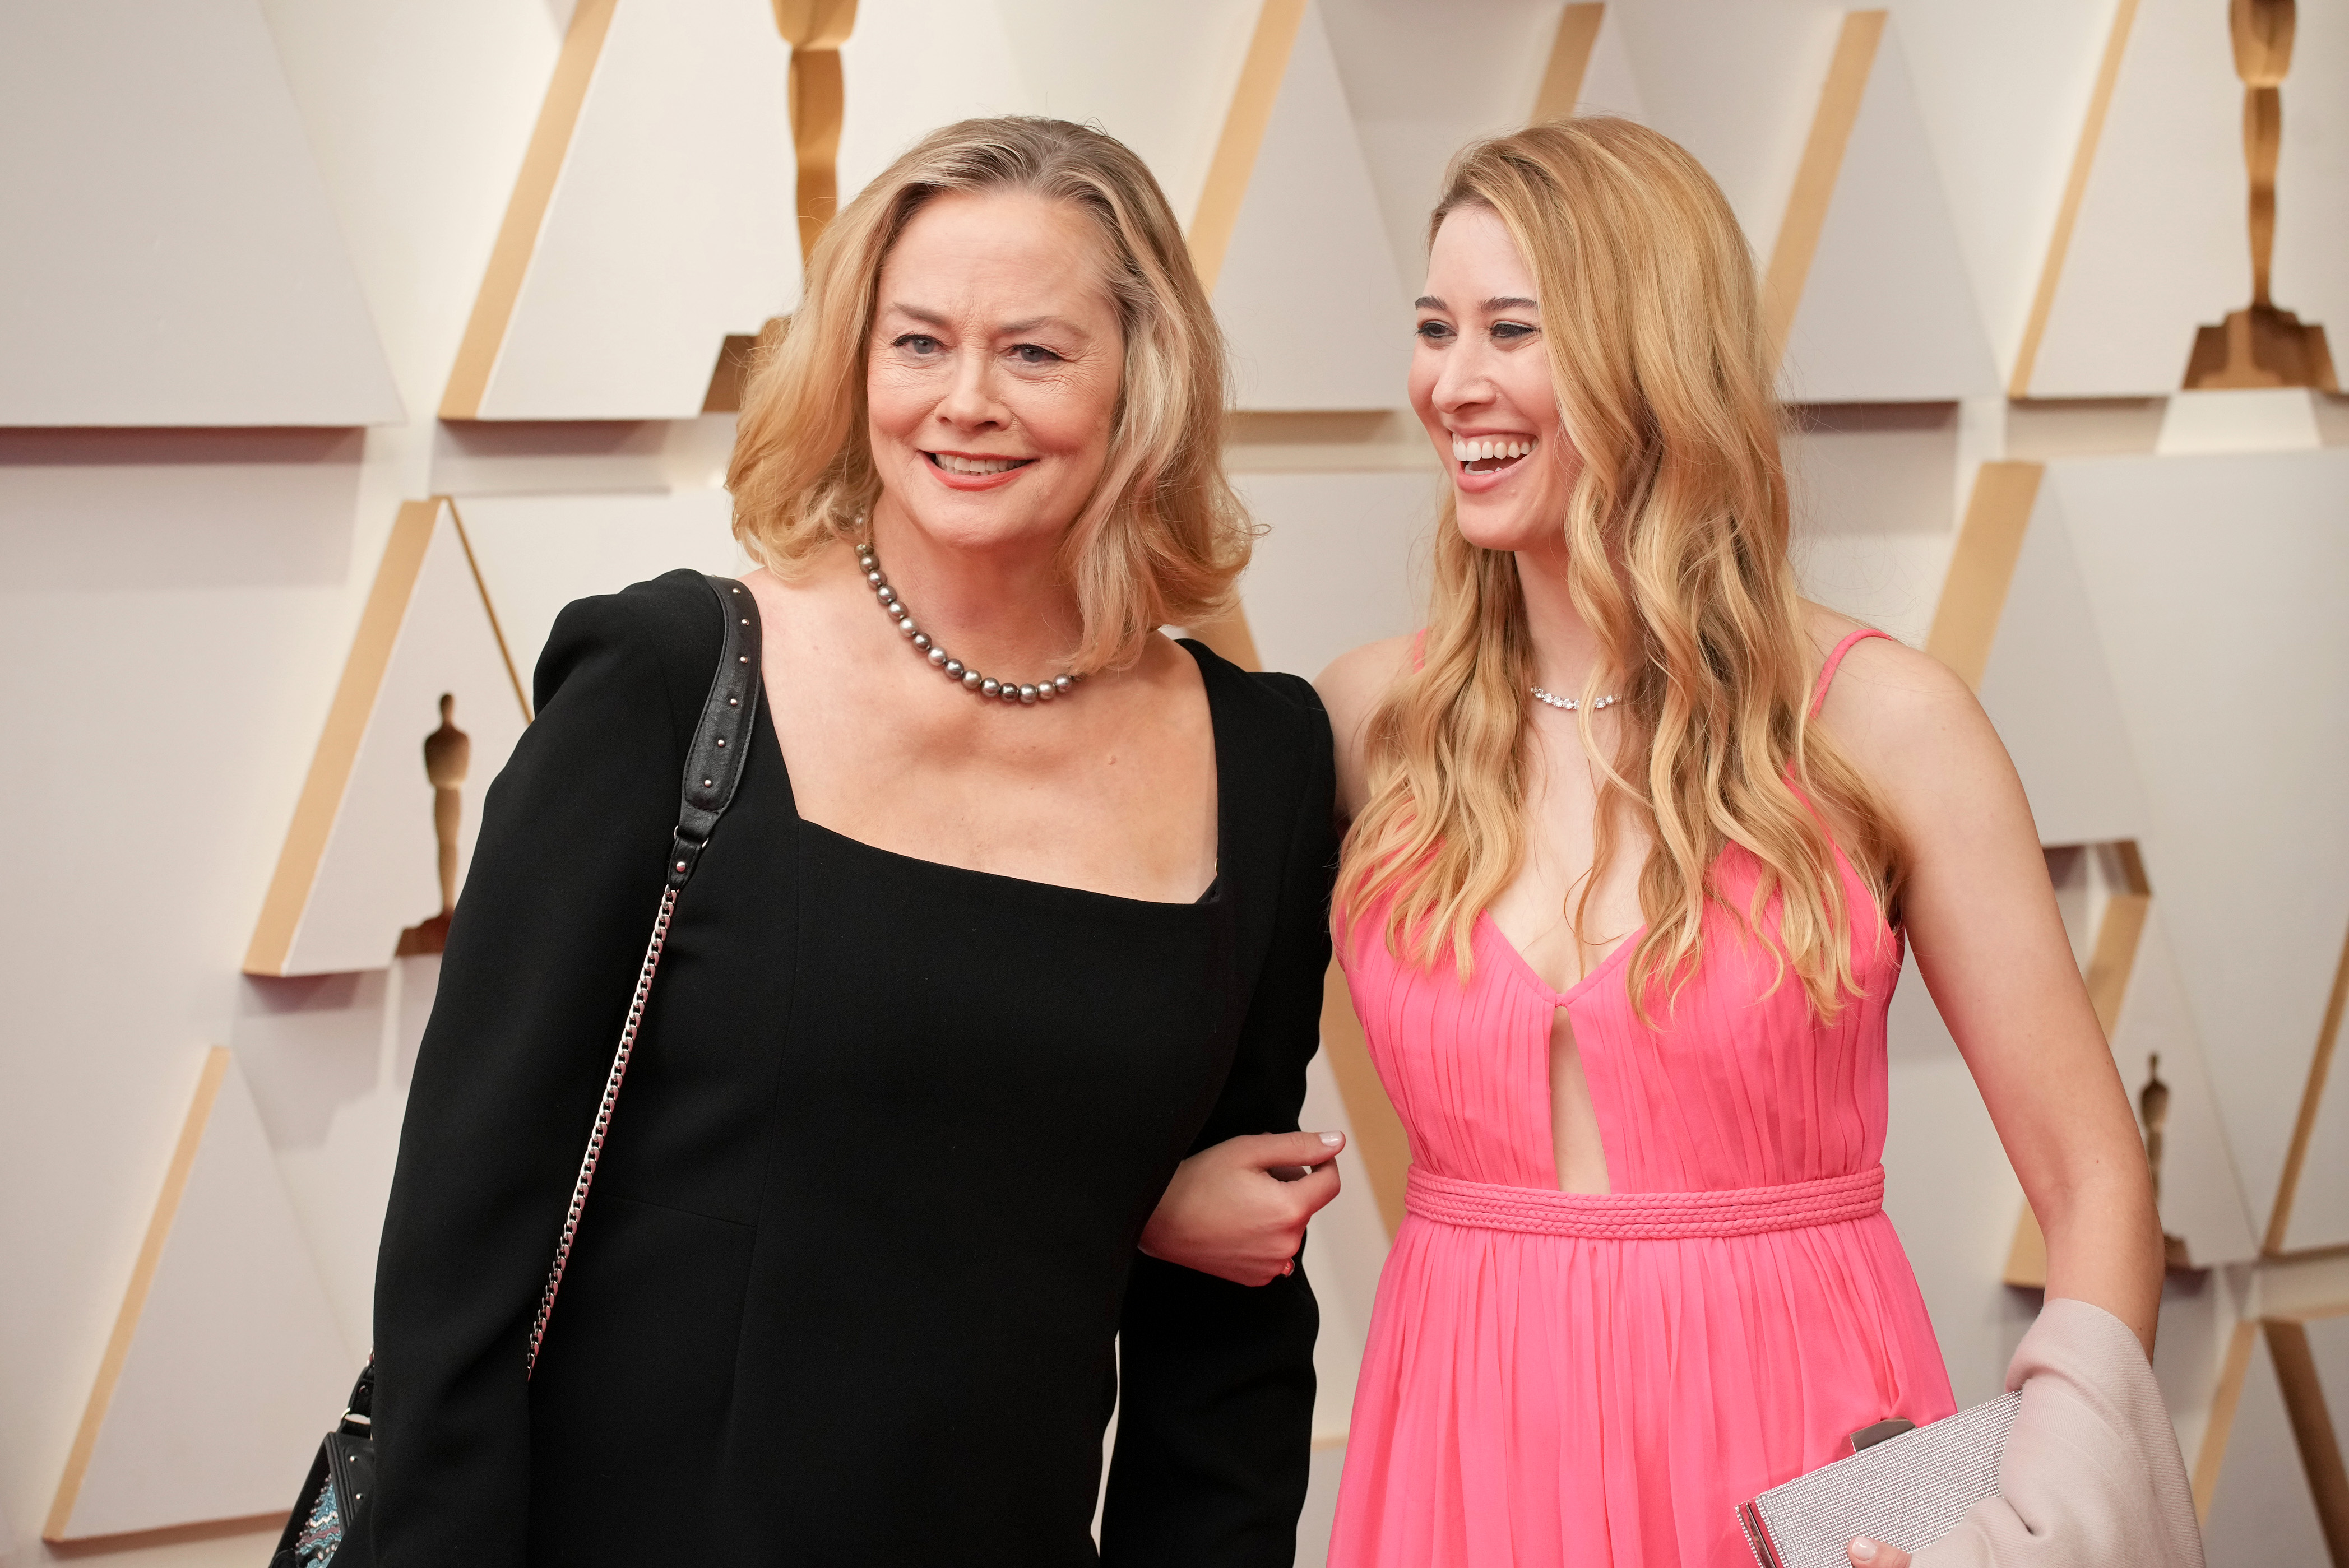 Cybill Shepherd and Ariel Shepherd-Oppenheim attend the 94th Annual Academy Awards at Hollywood and Highland on March 27, 2022, in Hollywood, California. | Source: Getty Images